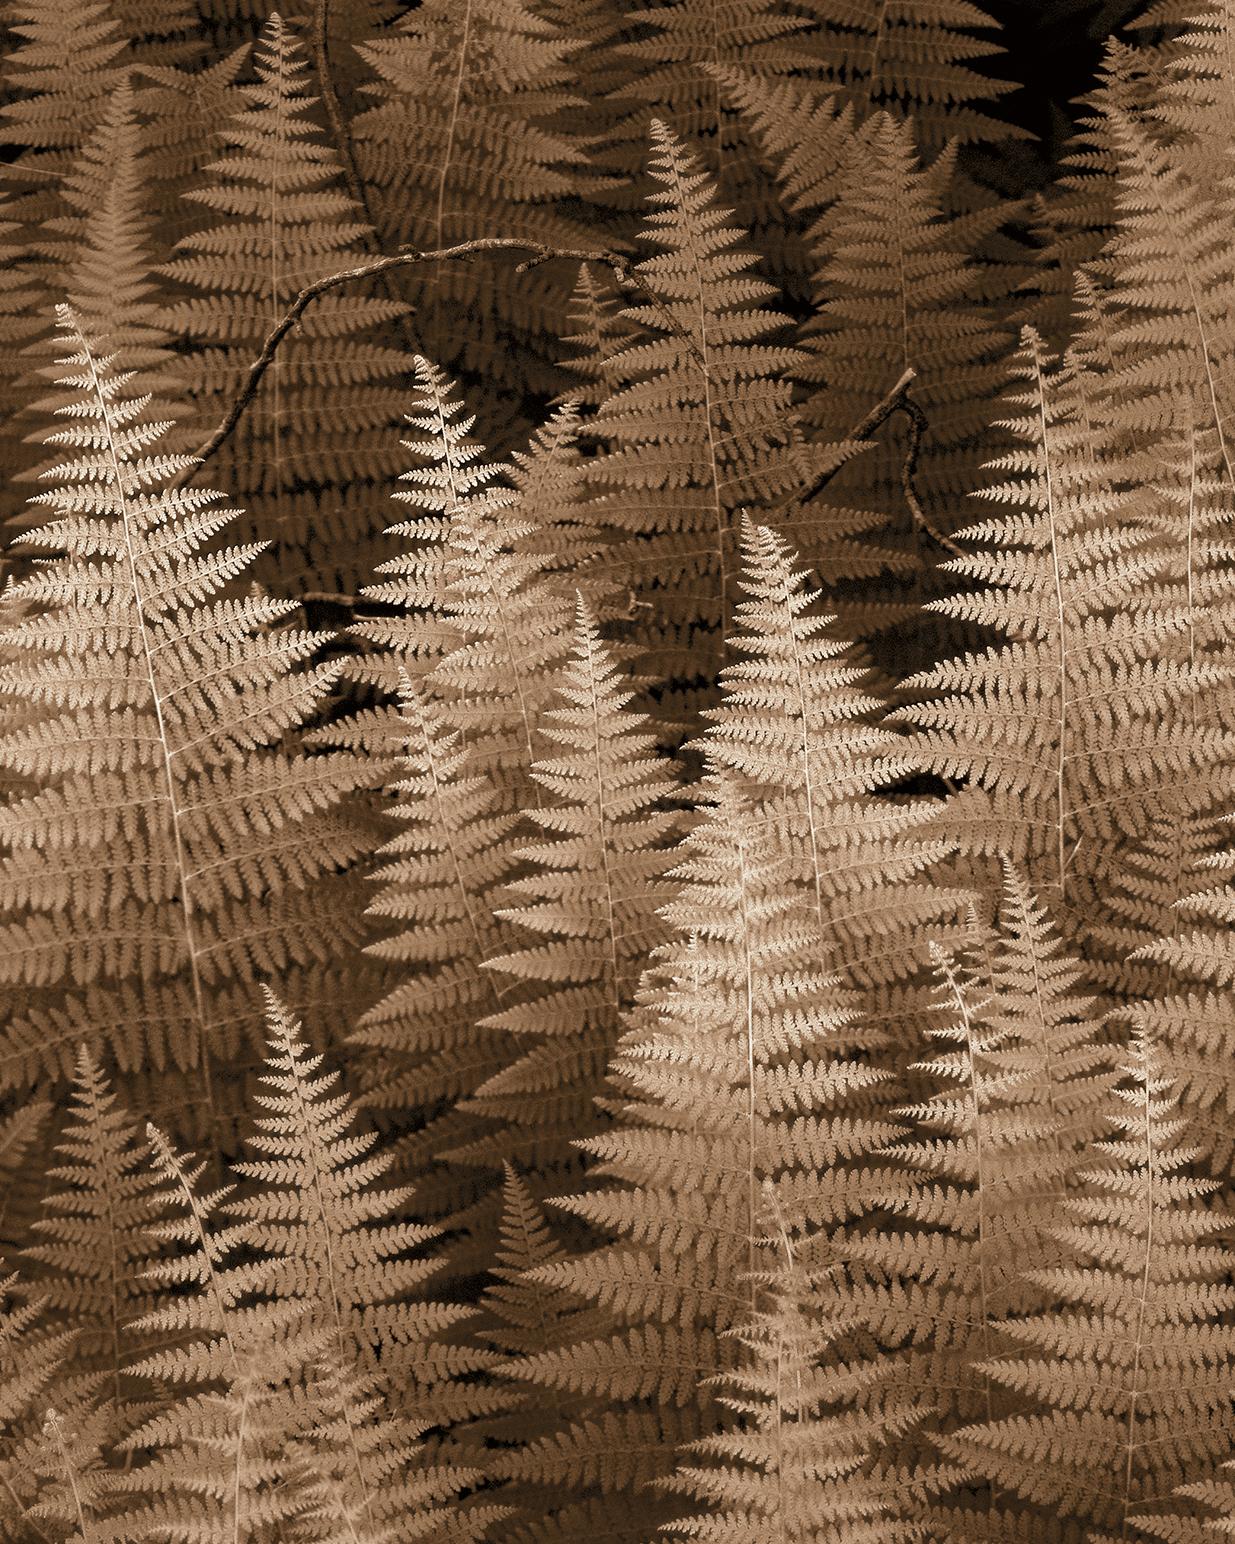 Ferns No. 2 (Sepia-Tone Botanical Still-Life Photograph on Watercolor Paper) For Sale 1